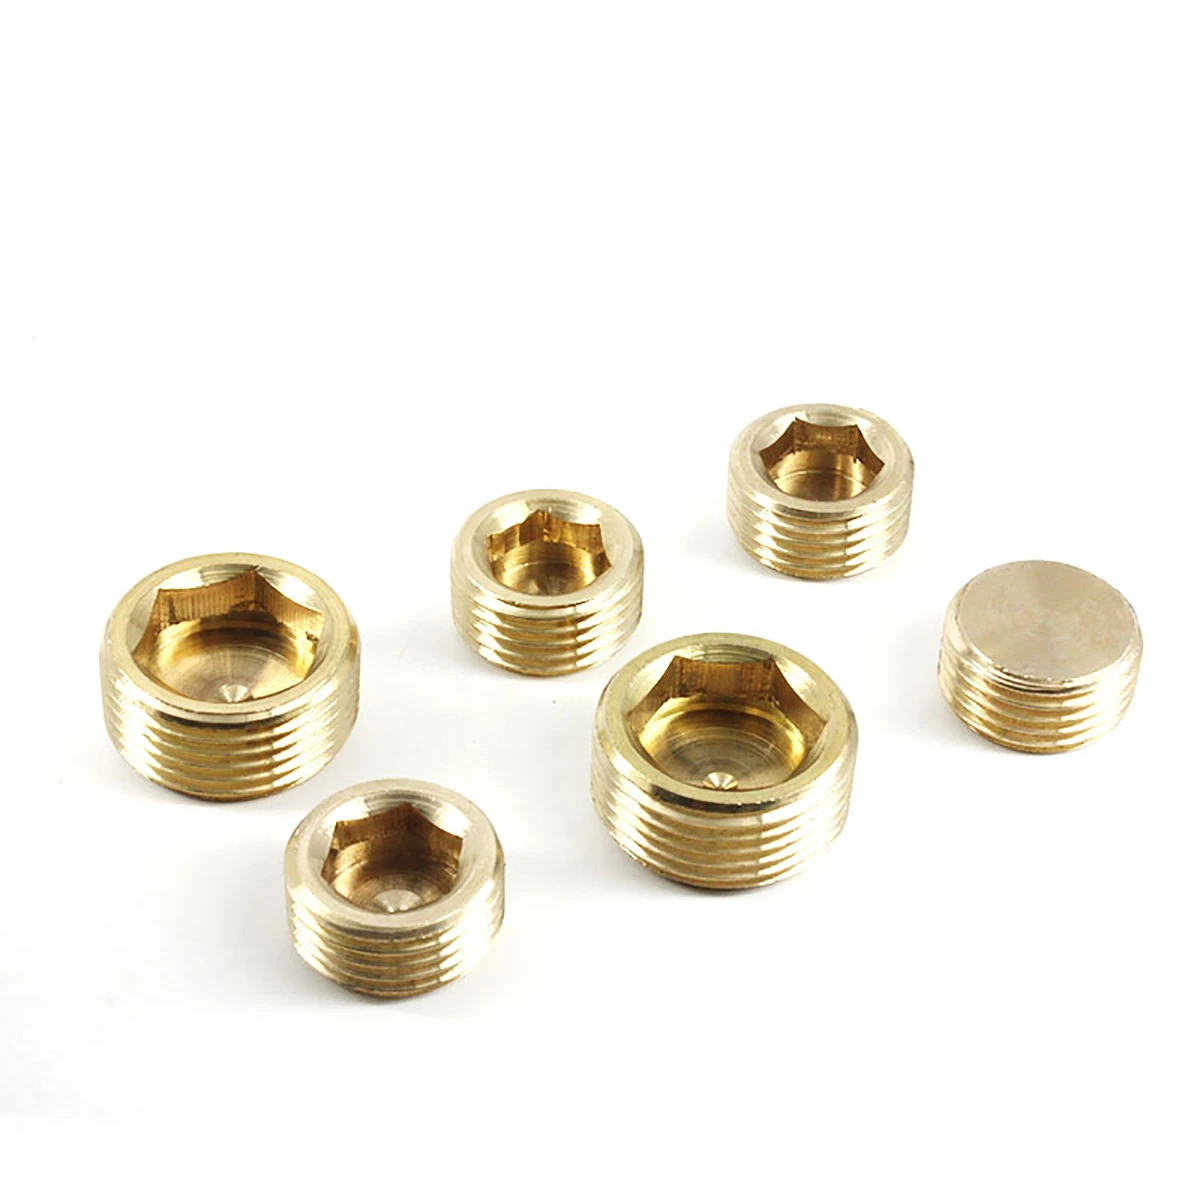 

1PCS 1/8" 1/4" 3/8" 1/2" 3/4" 1" BSP Male Thread Brass Hex Socket End Cap Plug Copper Coupler Connector Adapter Pipe Fittings